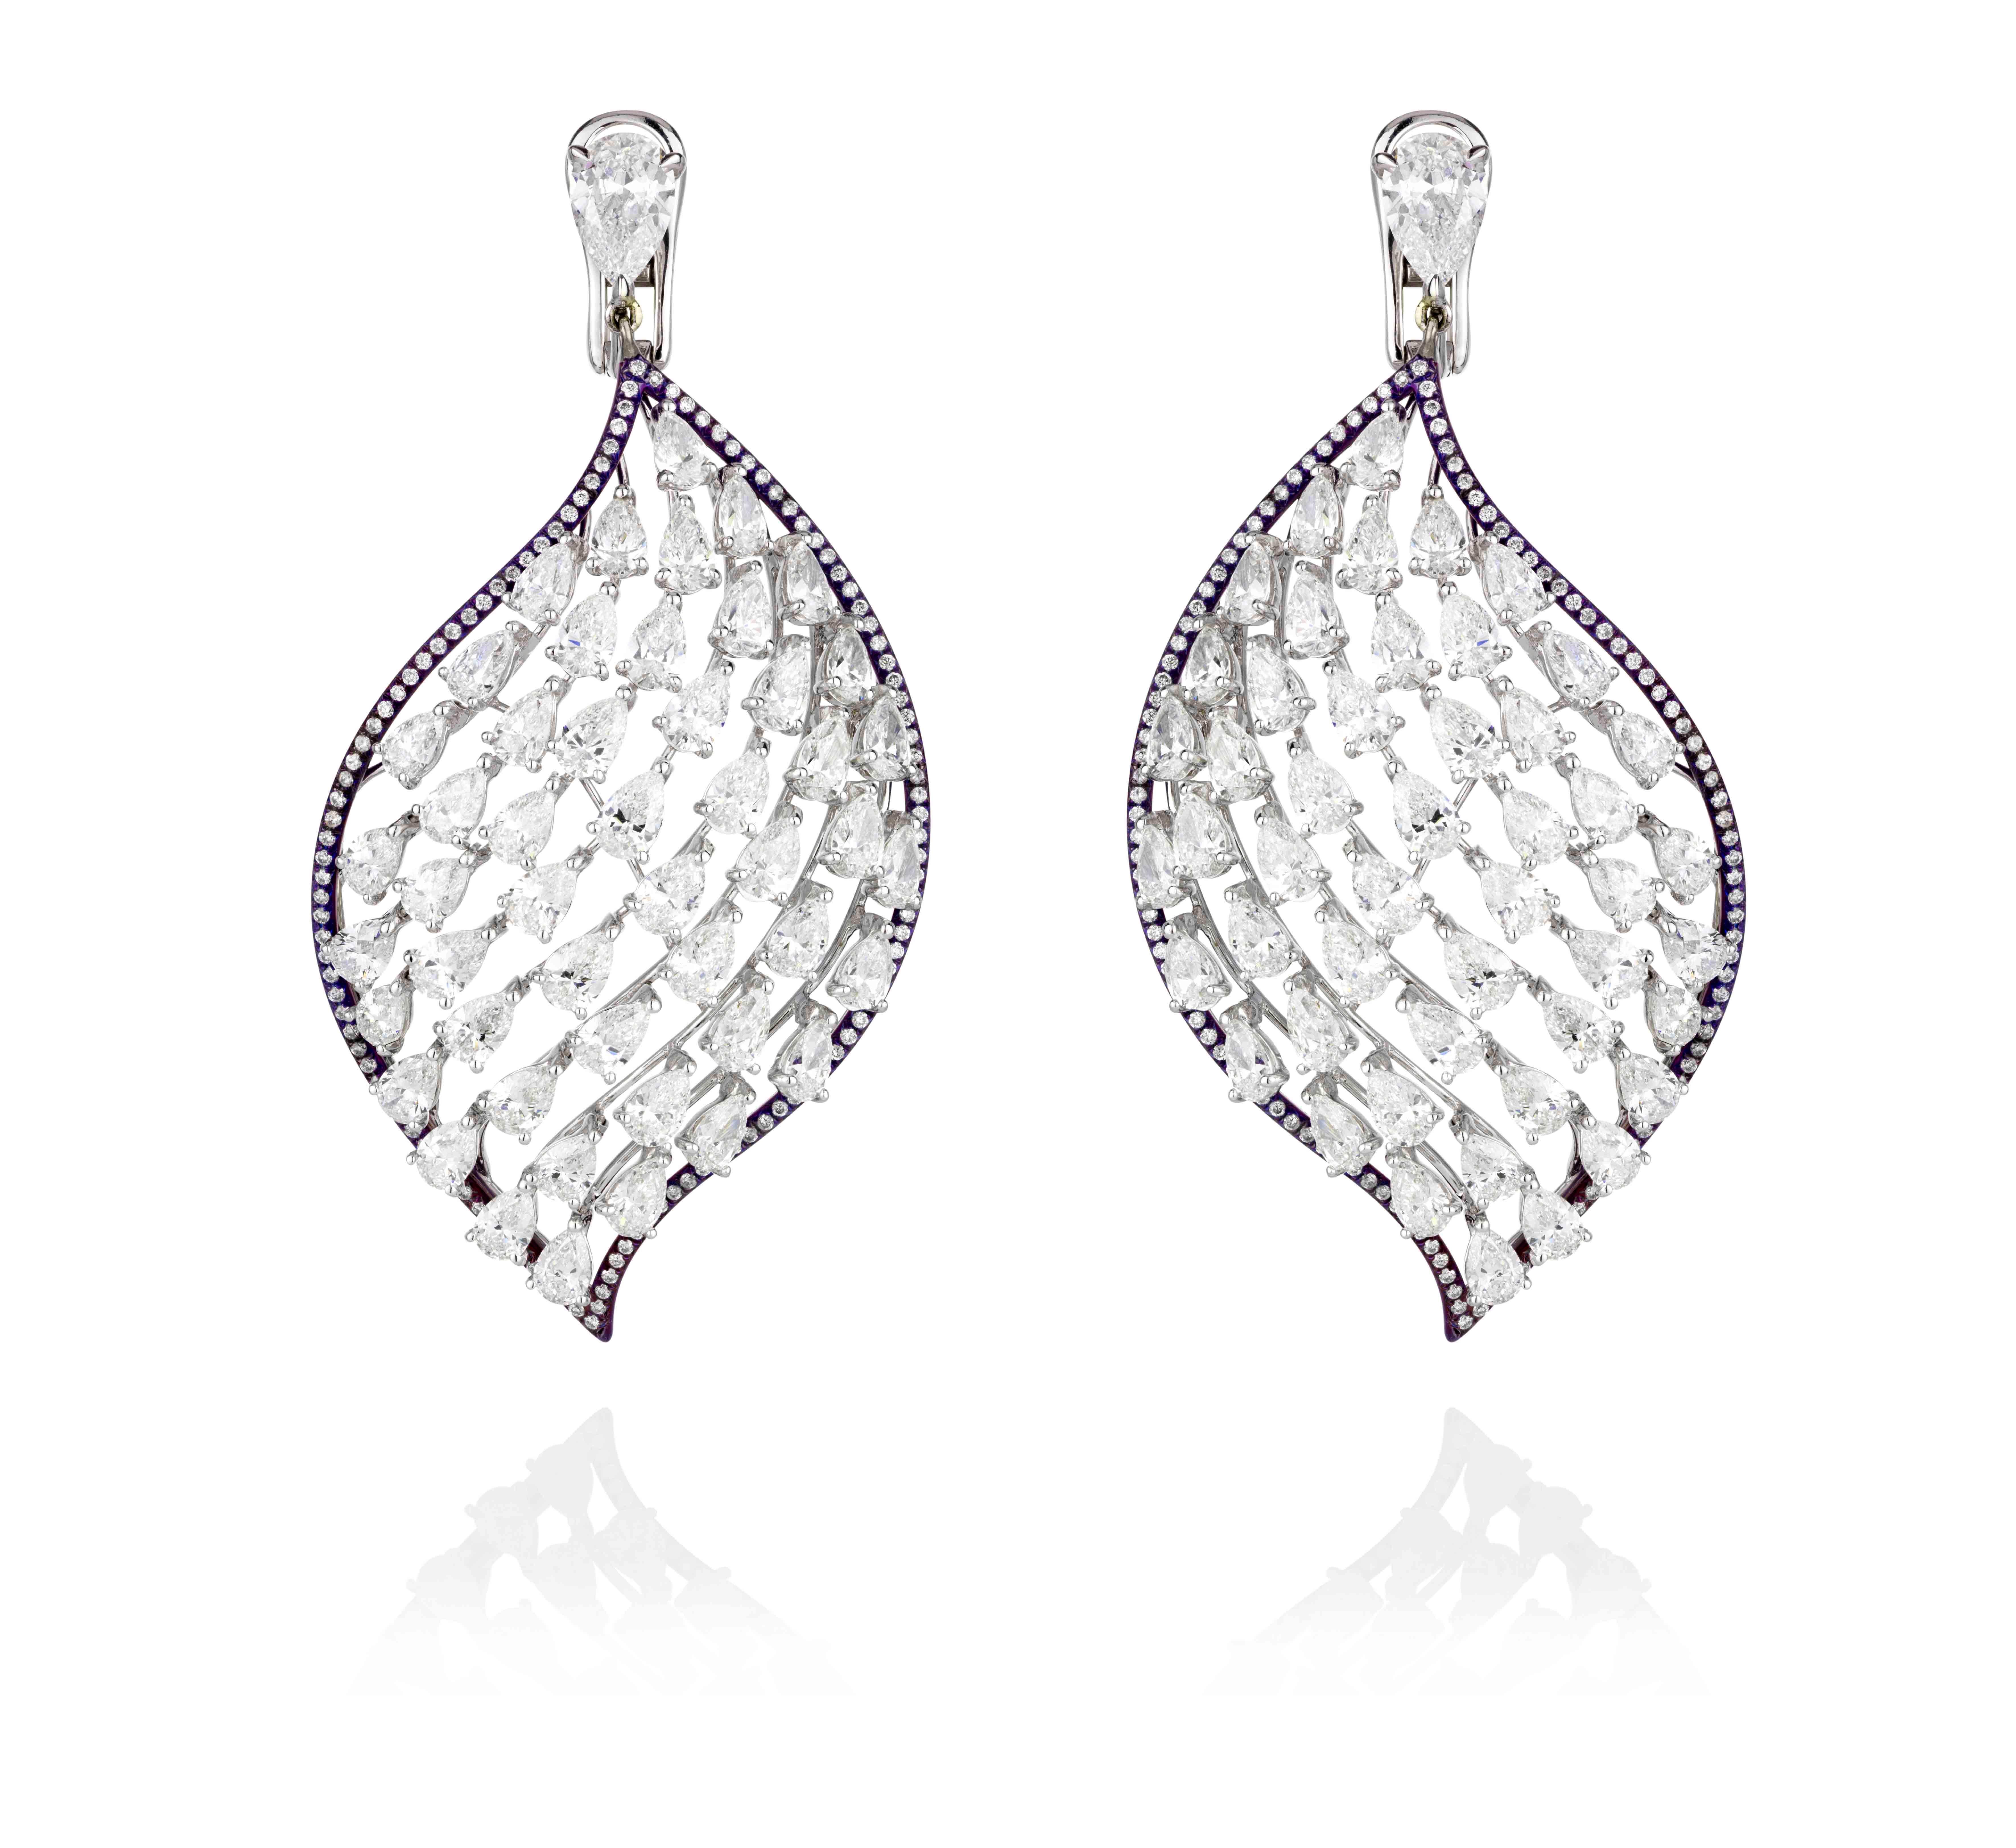 Pava Crystal Ball Cascade Necklace and Earring Set